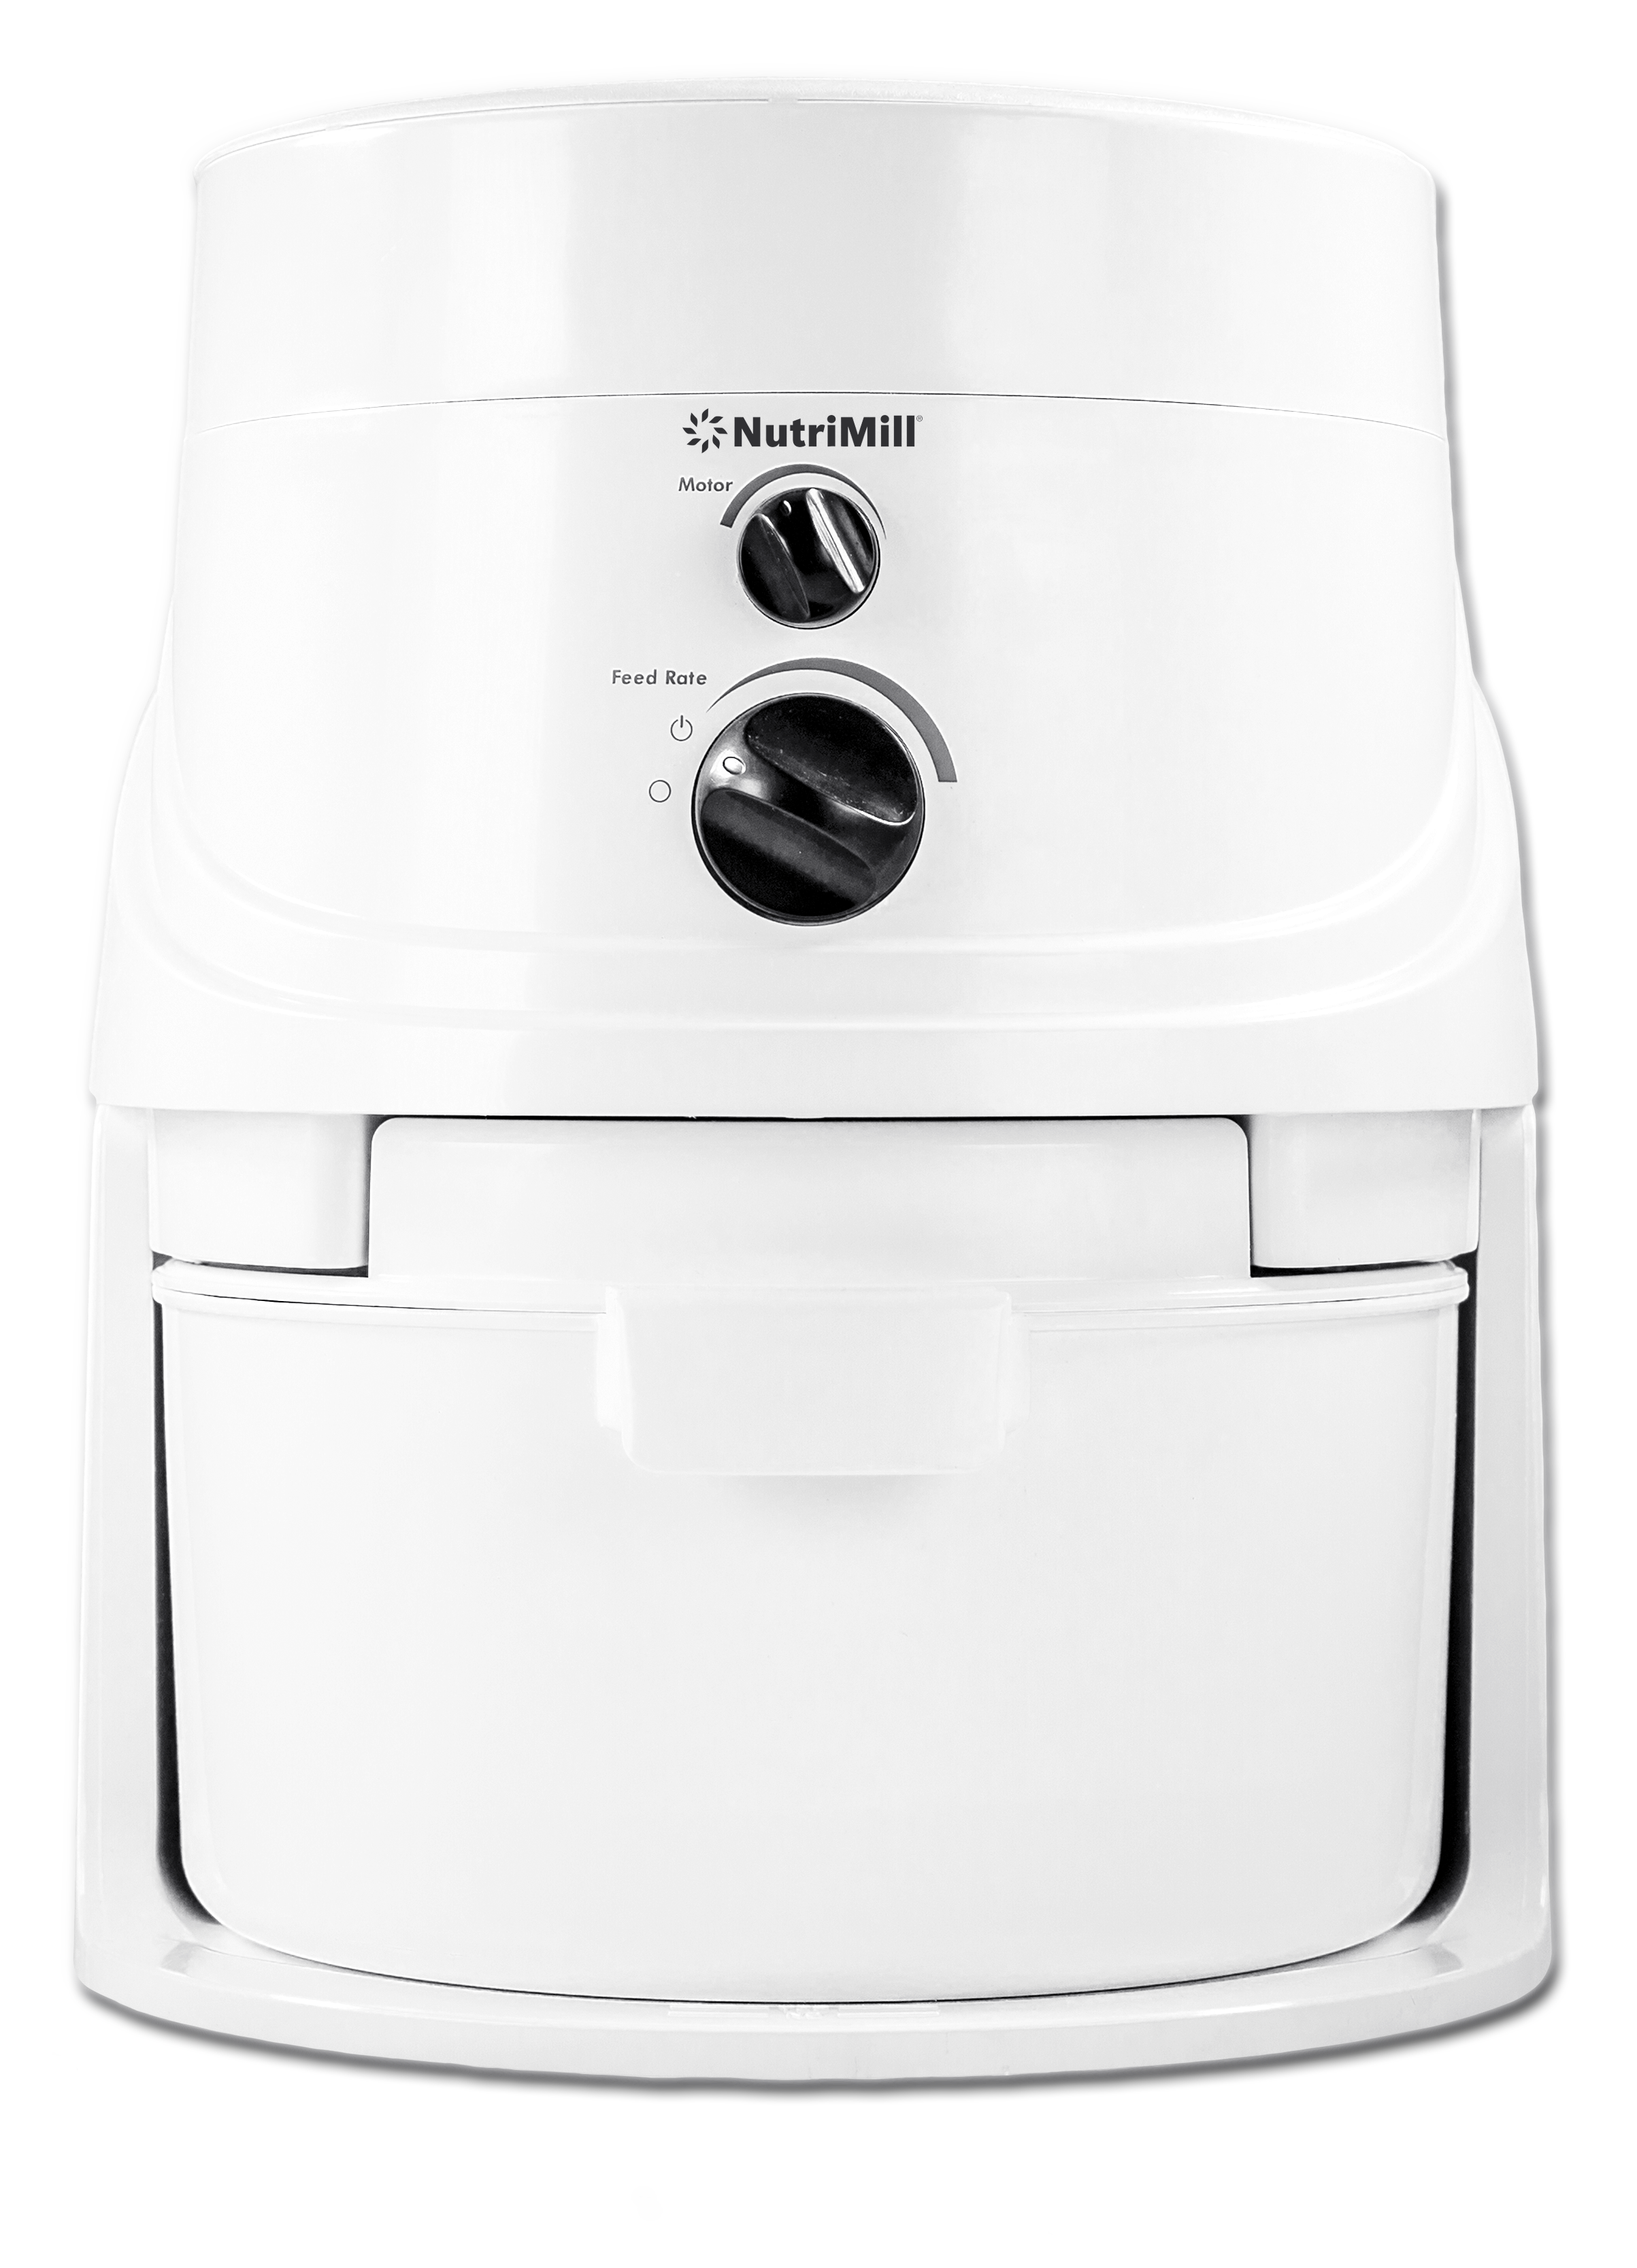 Nutrimill Grain Mill 760200 Free Shipping in Canada Clasic